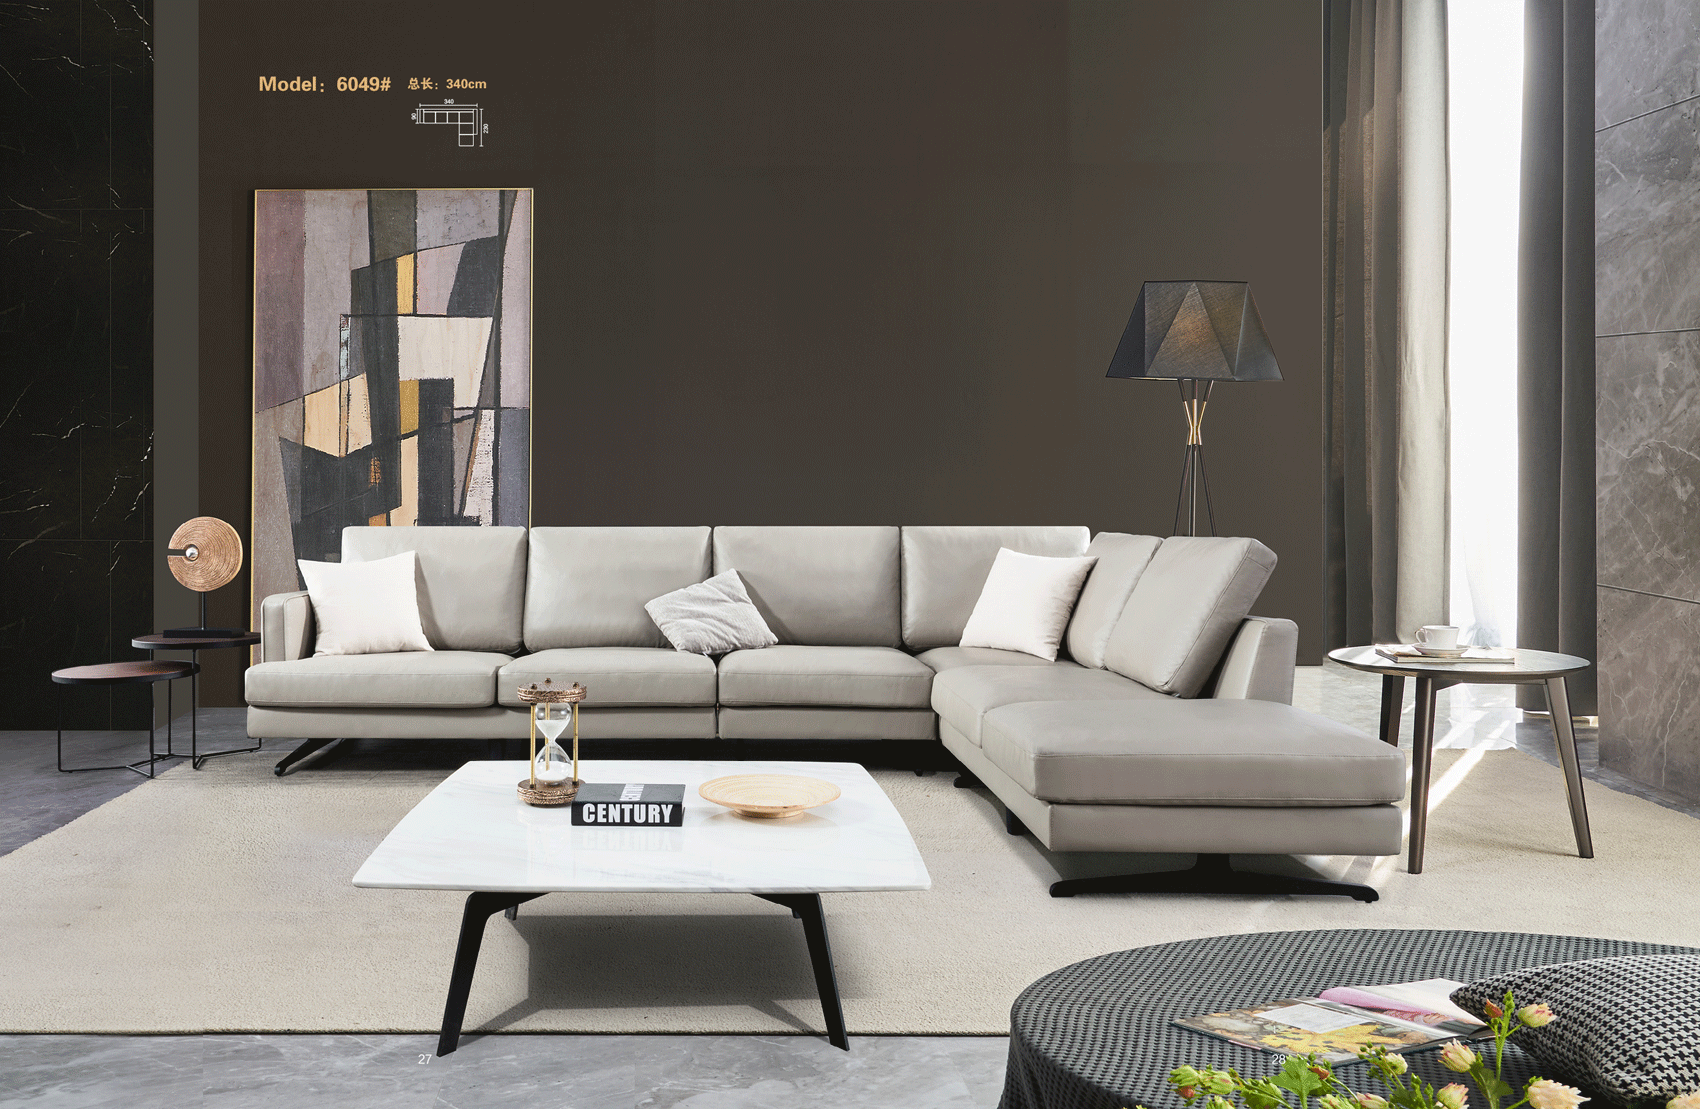 Brands Camel Classic Living Rooms, Italy 6049 Sectional